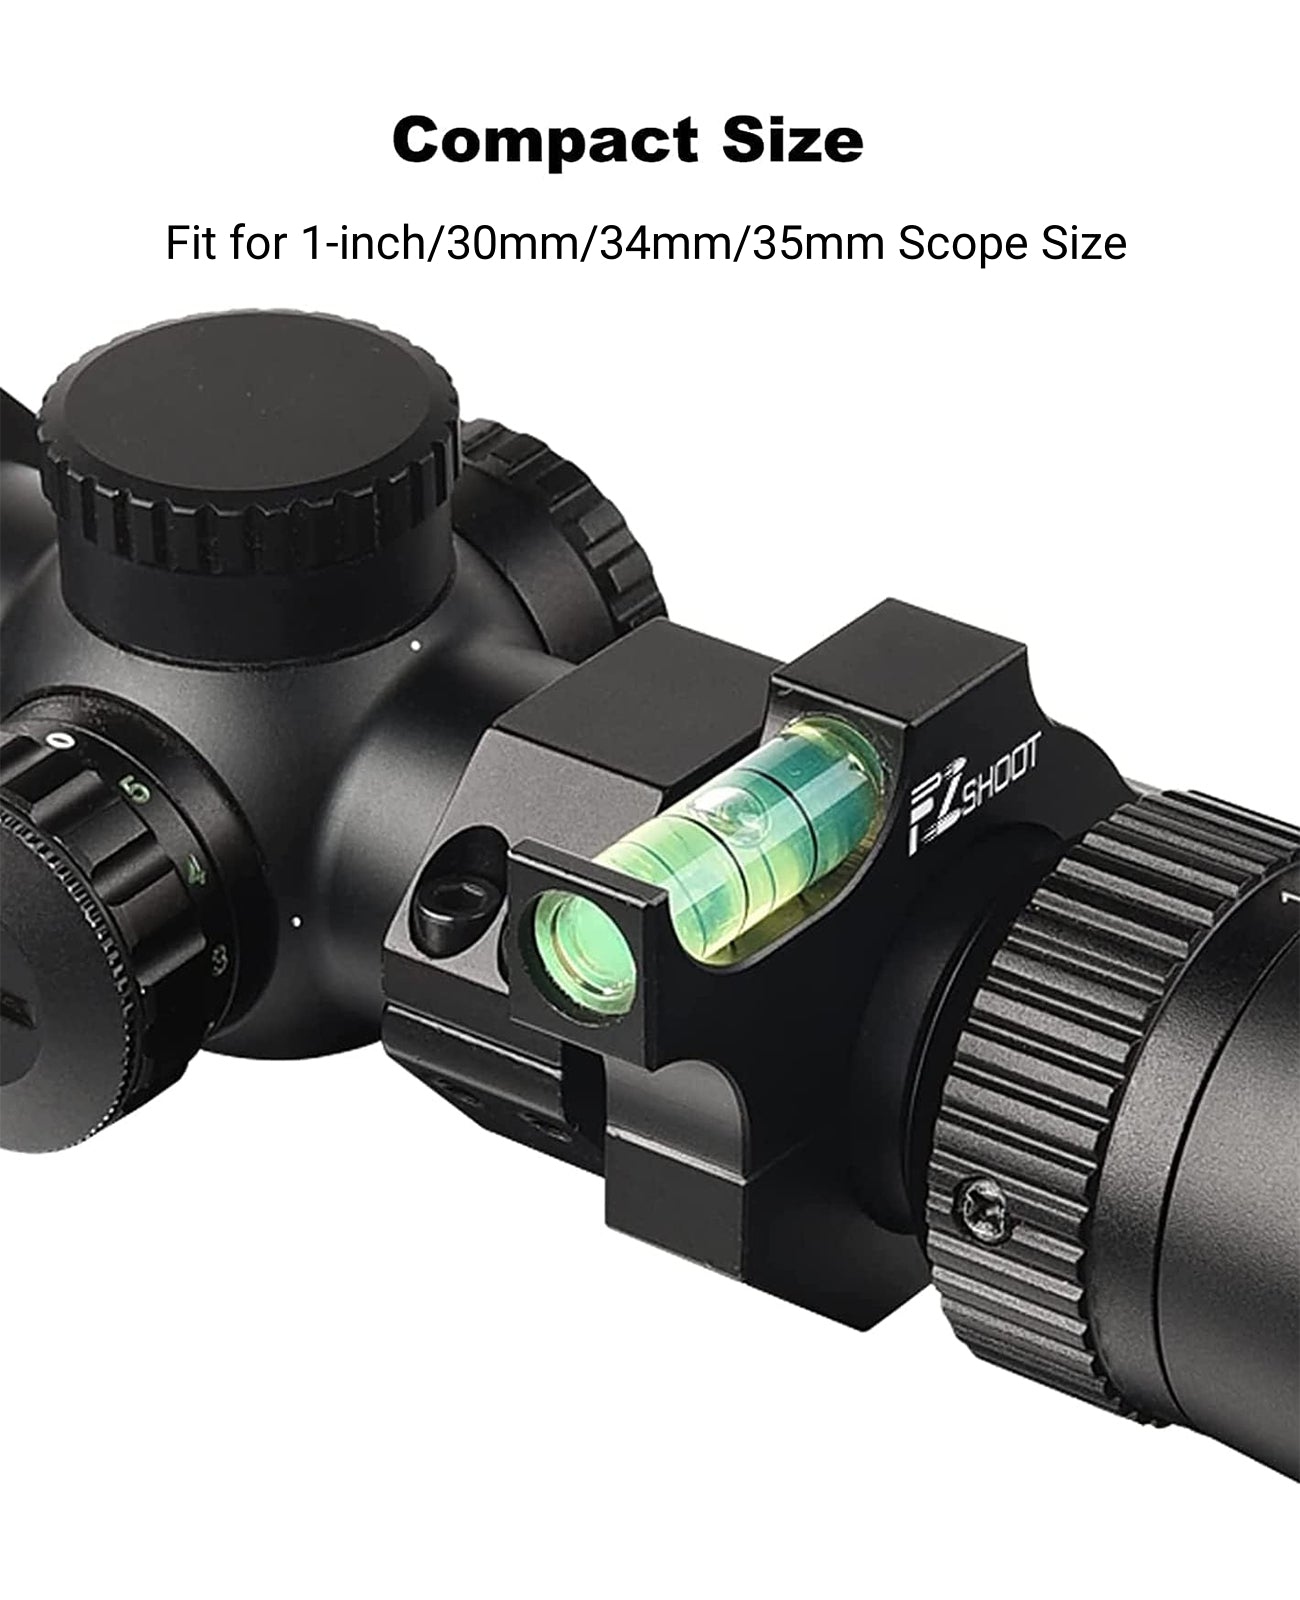 Compact Scope Level Kit for 2-inch/30mm/34mm/35mm Scope